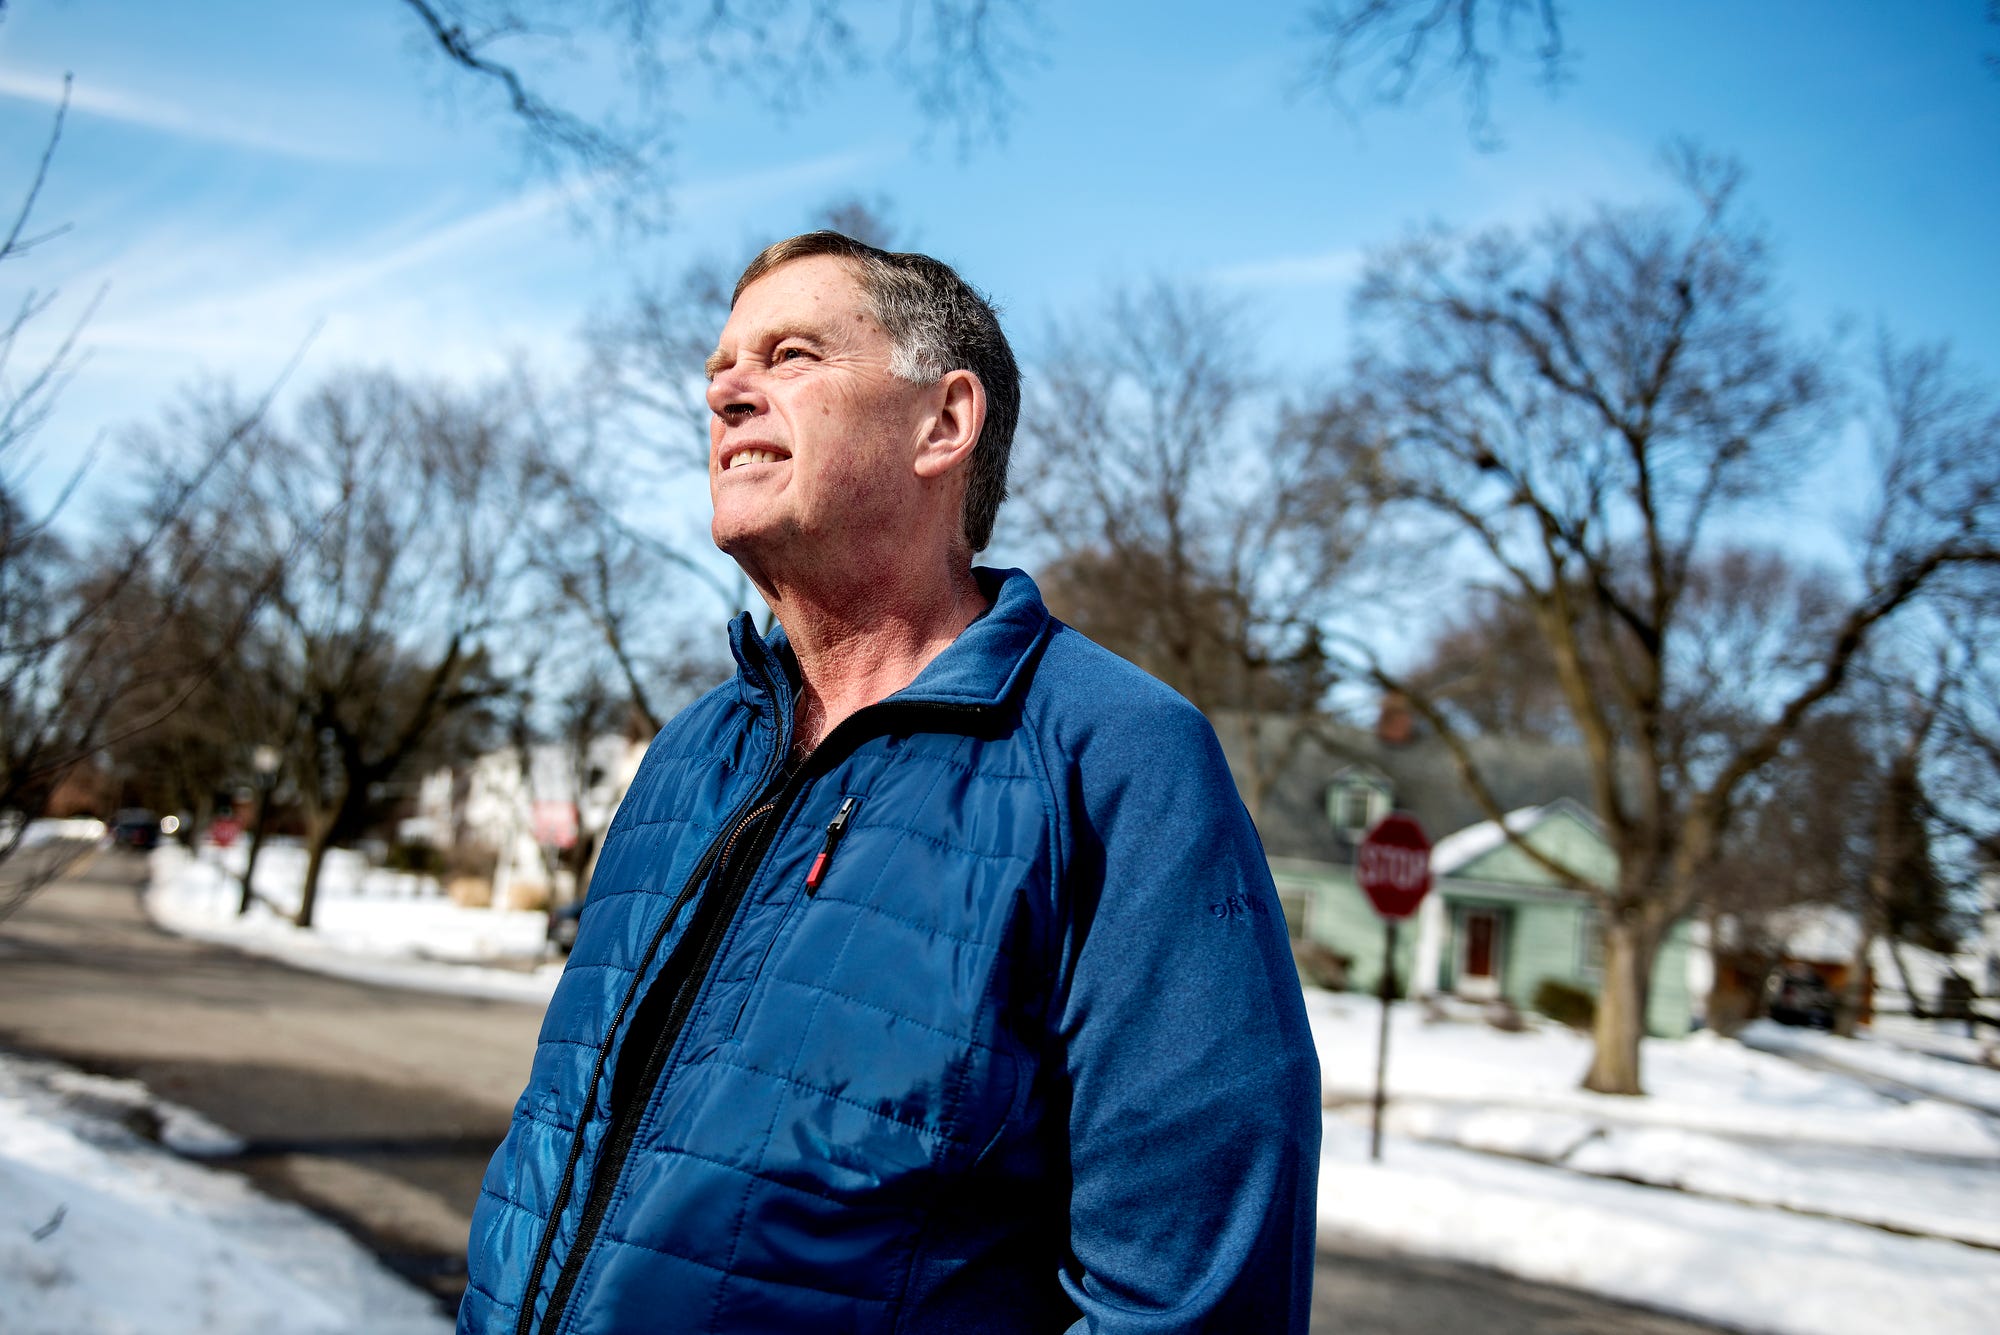 Dale Downes, 61, of East Lansing has lived at his two-story home at 660 Snyder St. since the early 90s. He and his wife raised three children there. Downes is photographed outside his home on Thursday, Feb. 21, 2019, in East Lansing.